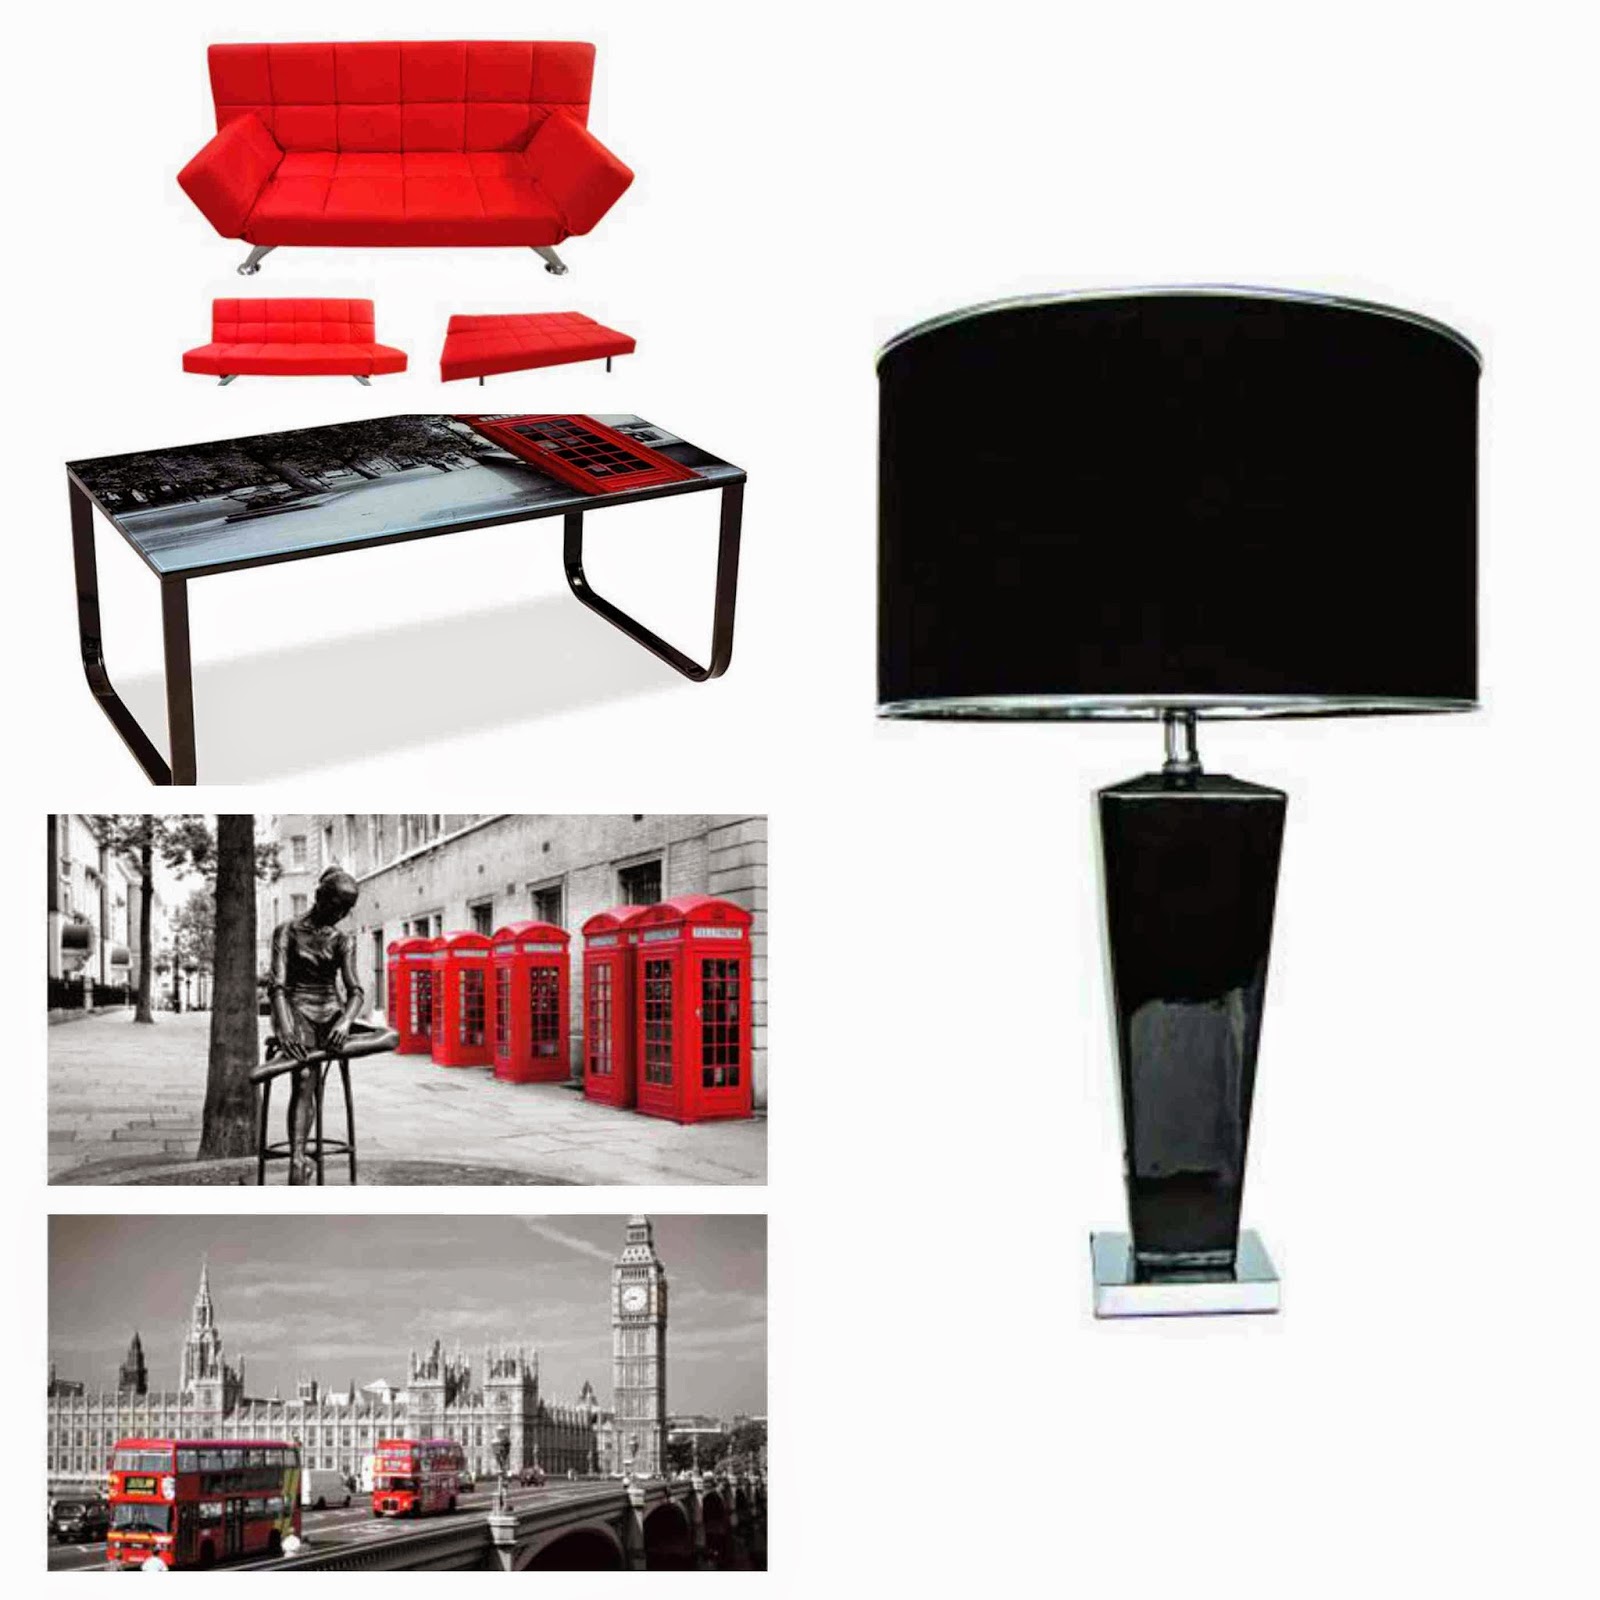 Coffee table metal legs glass top London wall art red sofa bed 